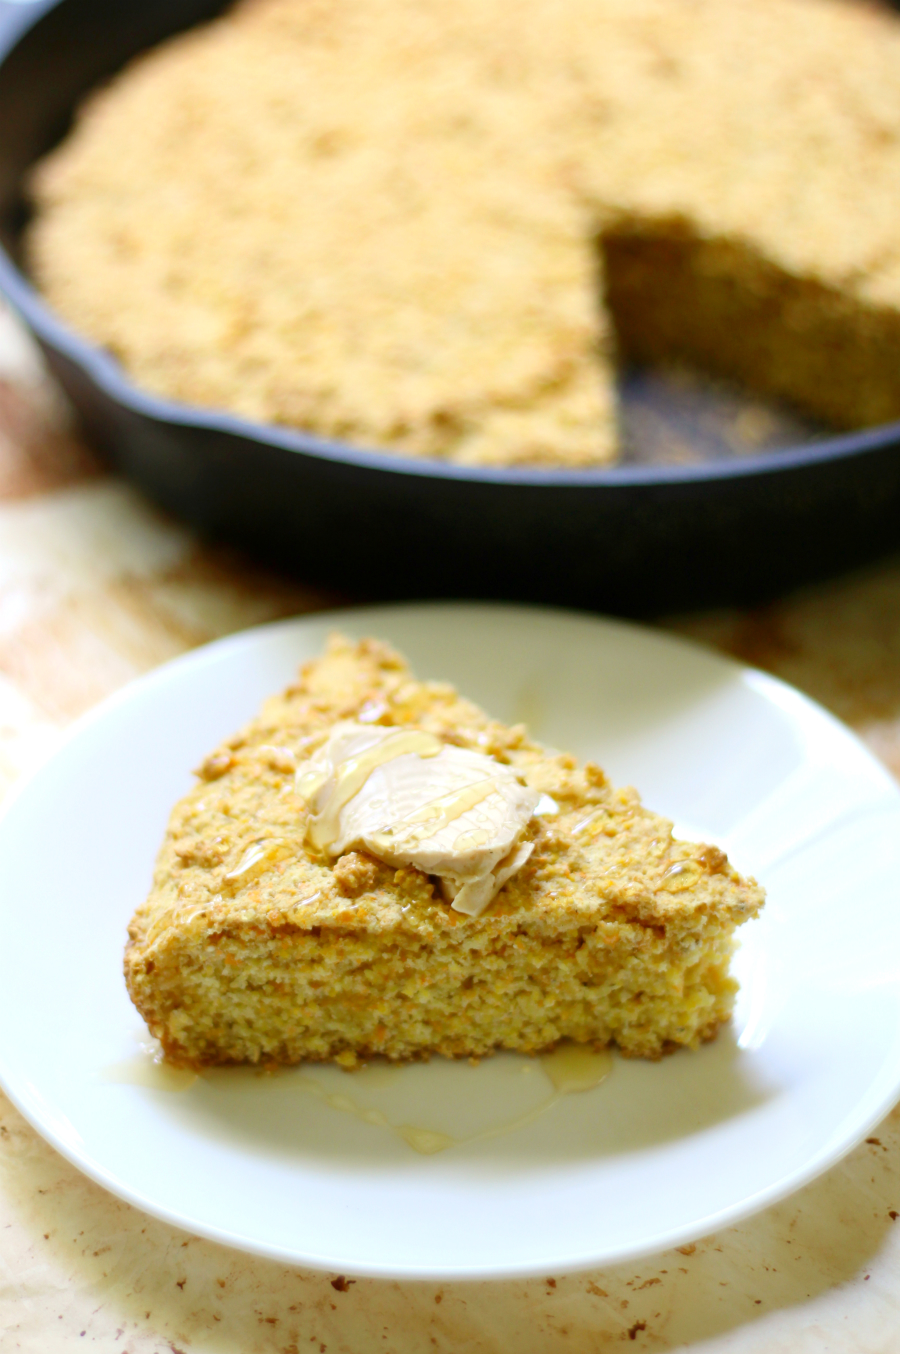 Rustic Gluten-Free Cornbread | Strength and Sunshine @RebeccaGF666 Enjoy the old-fashioned classic once again! Rustic Gluten-Free Cornbread that's vegan and top 8 allergy-free. Baked right in your grandma's seasoned cast iron skillet, this cornbread recipe will bring back all the comfort and good feels!